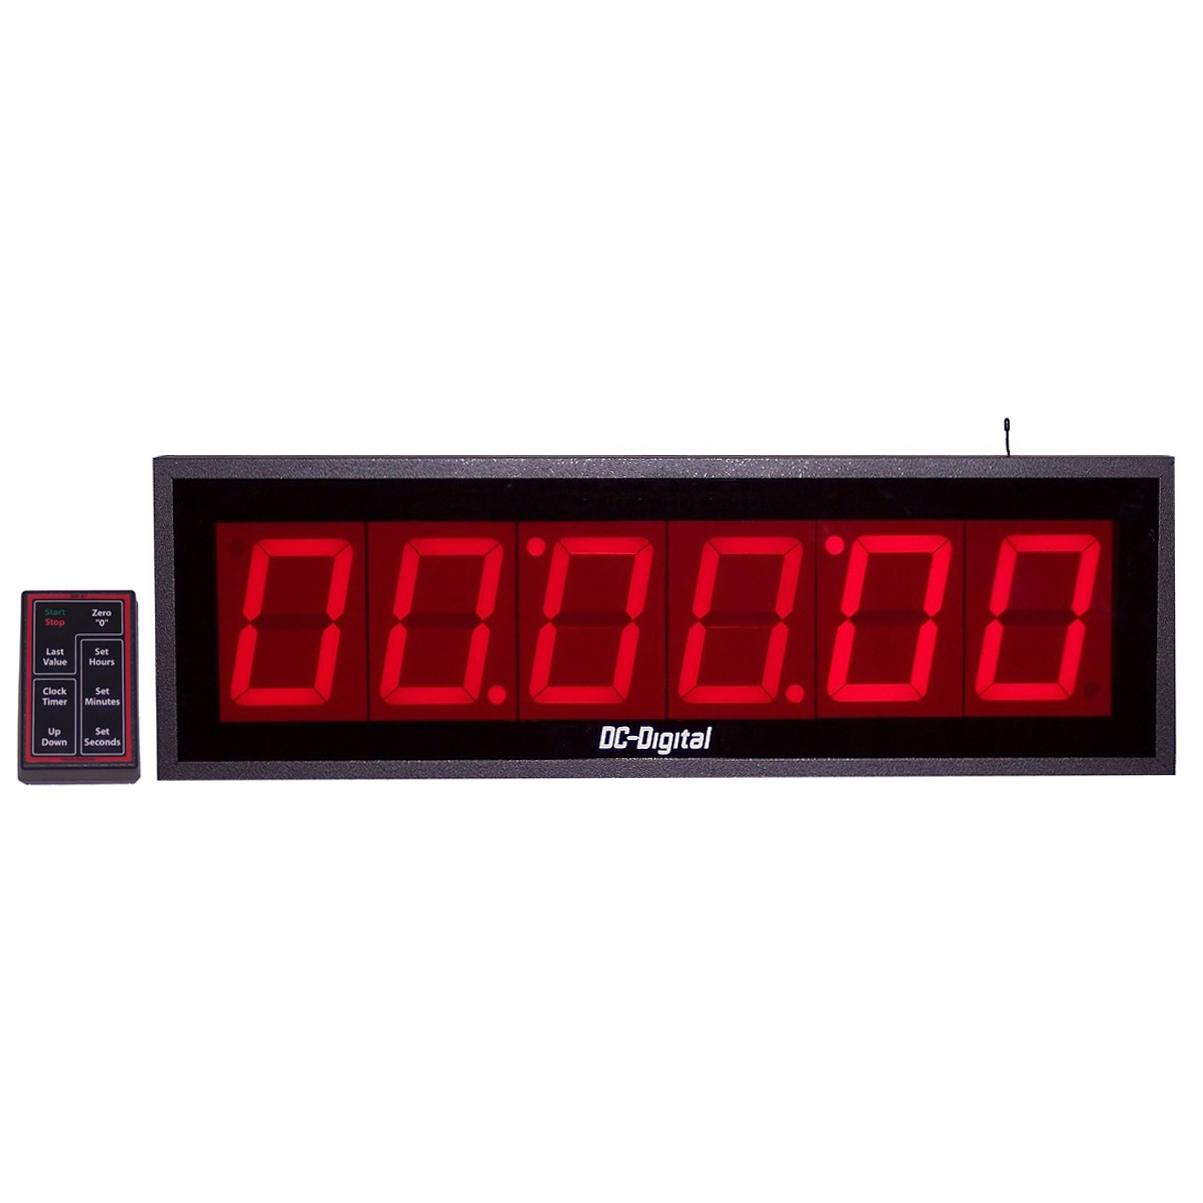 24 Hour Digital Timer with Countdown, Count-up and Clock Feature